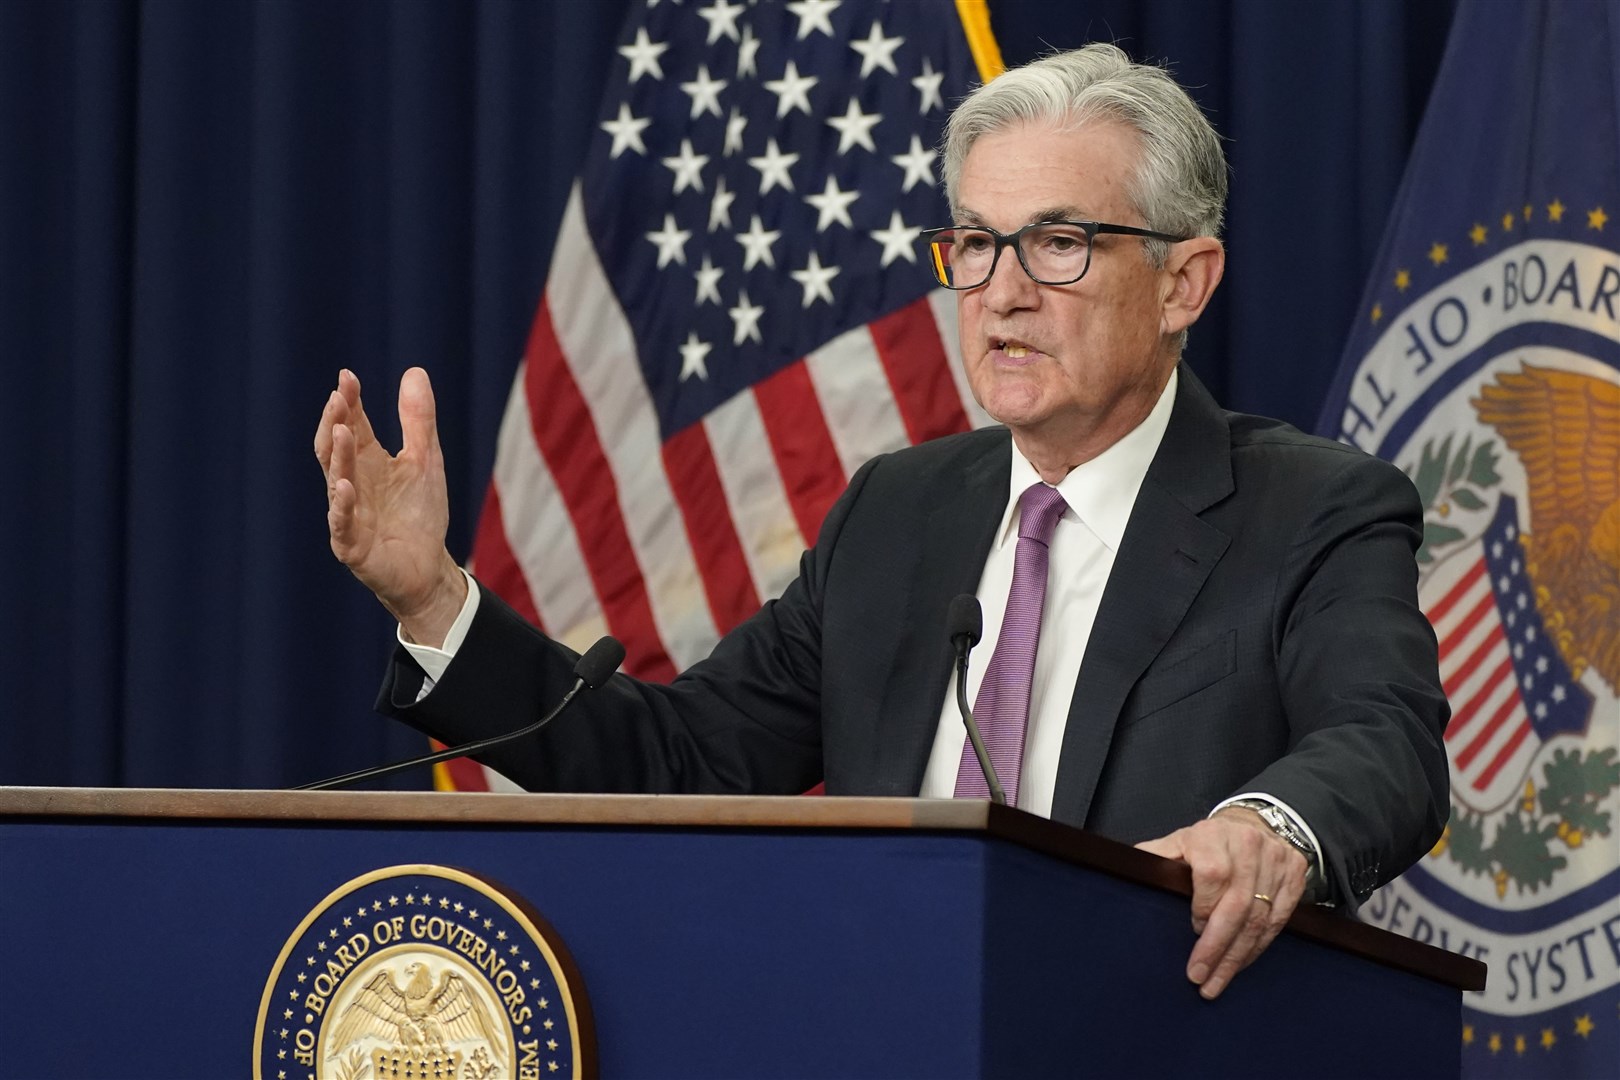 US Federal Reserve chairman Jerome Powell speaks during a news conference in Washington as the Fed opted to increase interest rates again on Wednesday (Manuel Balce Ceneta/AP/PA)